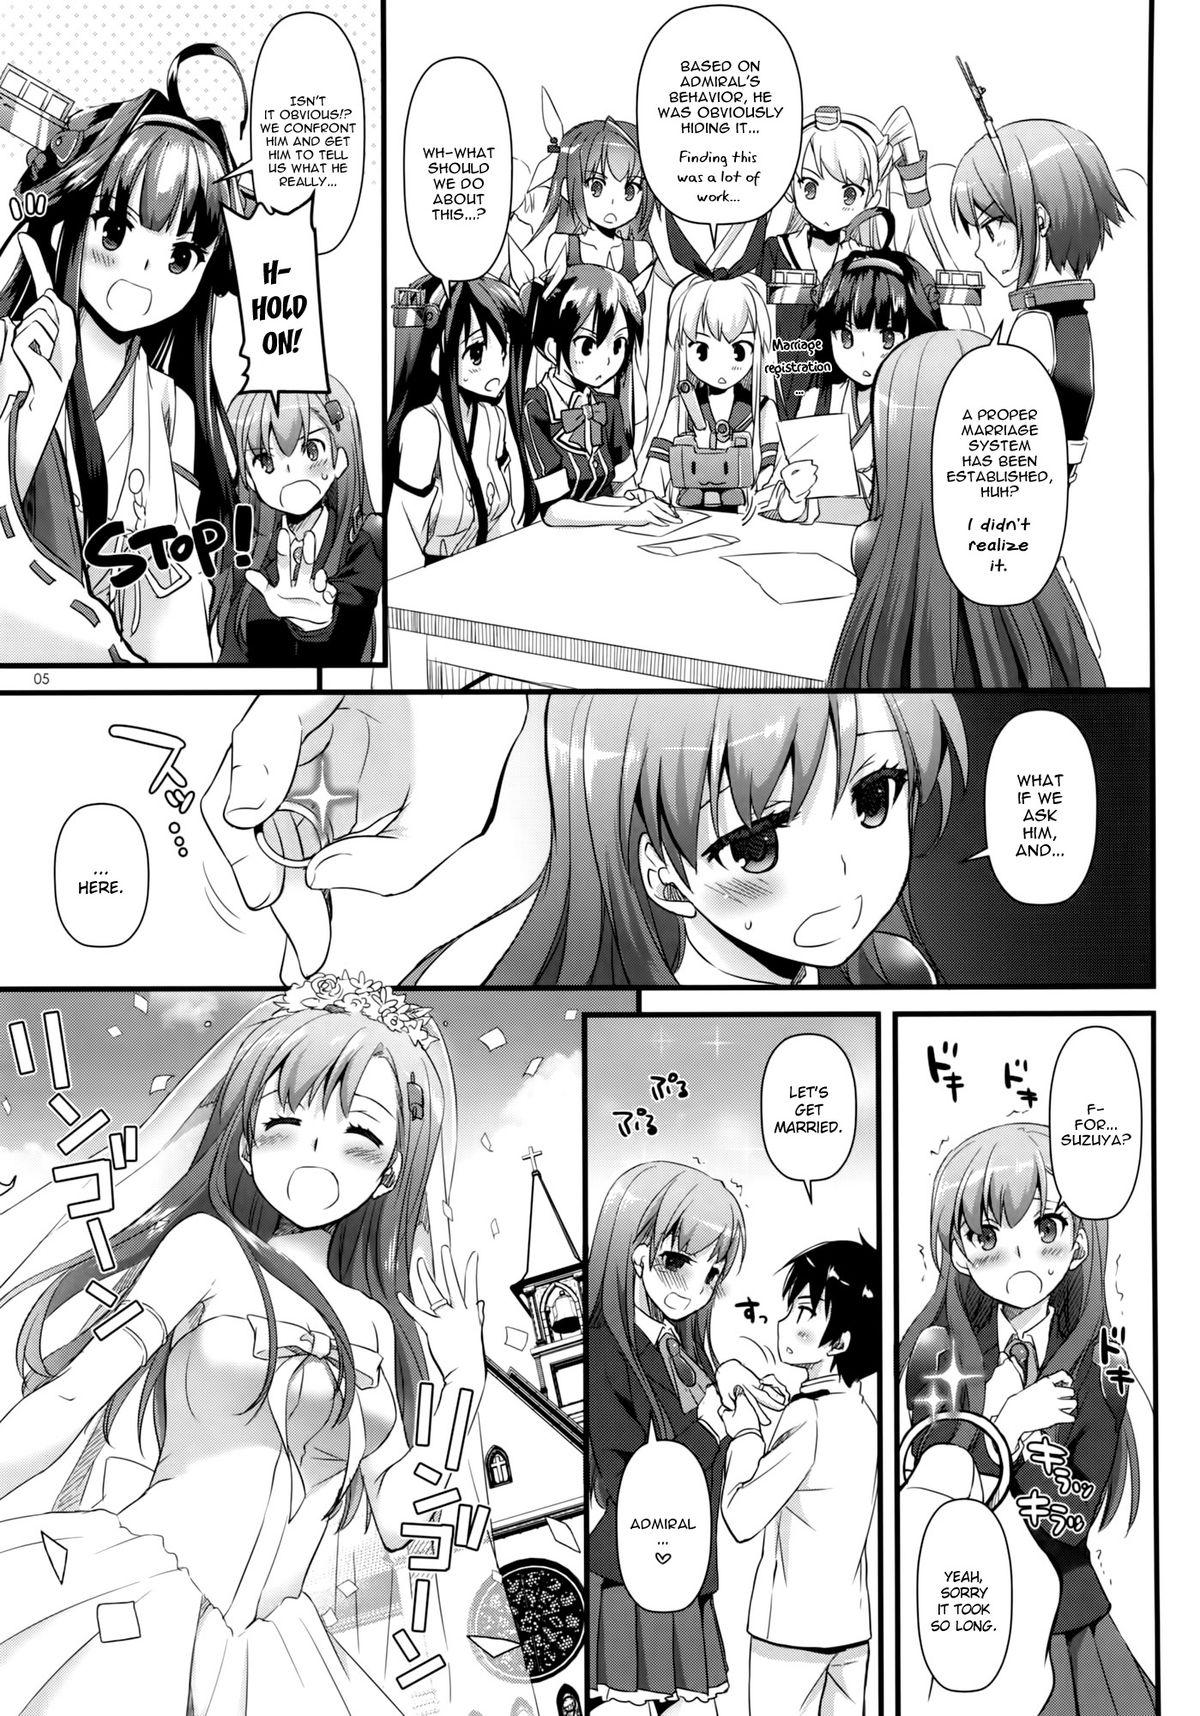 Exhib D.L. action 88 - Kantai collection Flashing - Page 5